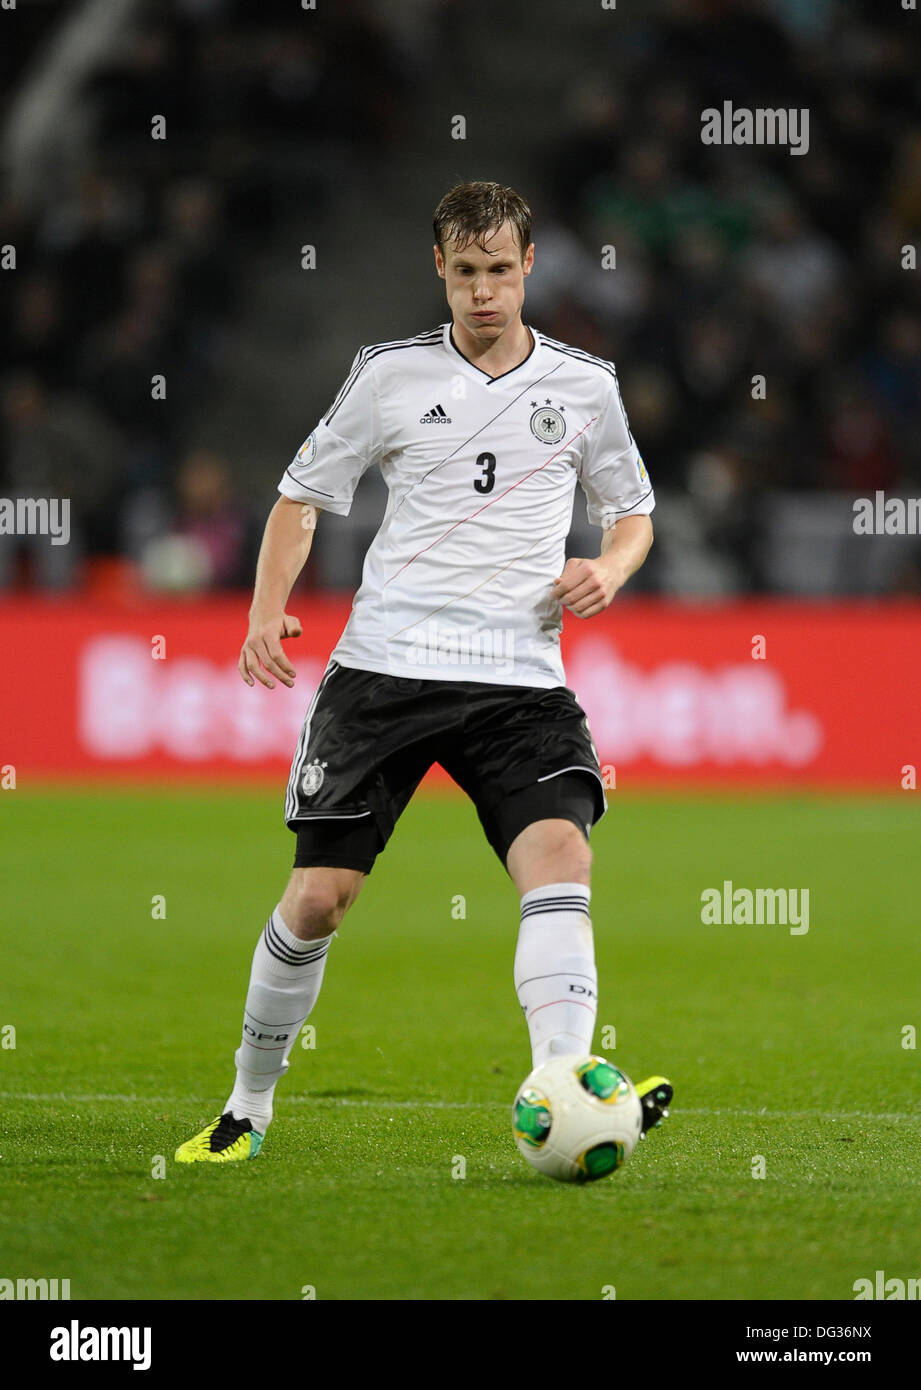 Cologne Germany 11th Oct. 2013,  Qualifying match for  FIFA Football World Cup 2014 Brasil in RheinEnergie stadium, Germany vs Republic of Ireland 3:0 -- Marcell Jansen (GER) Stock Photo